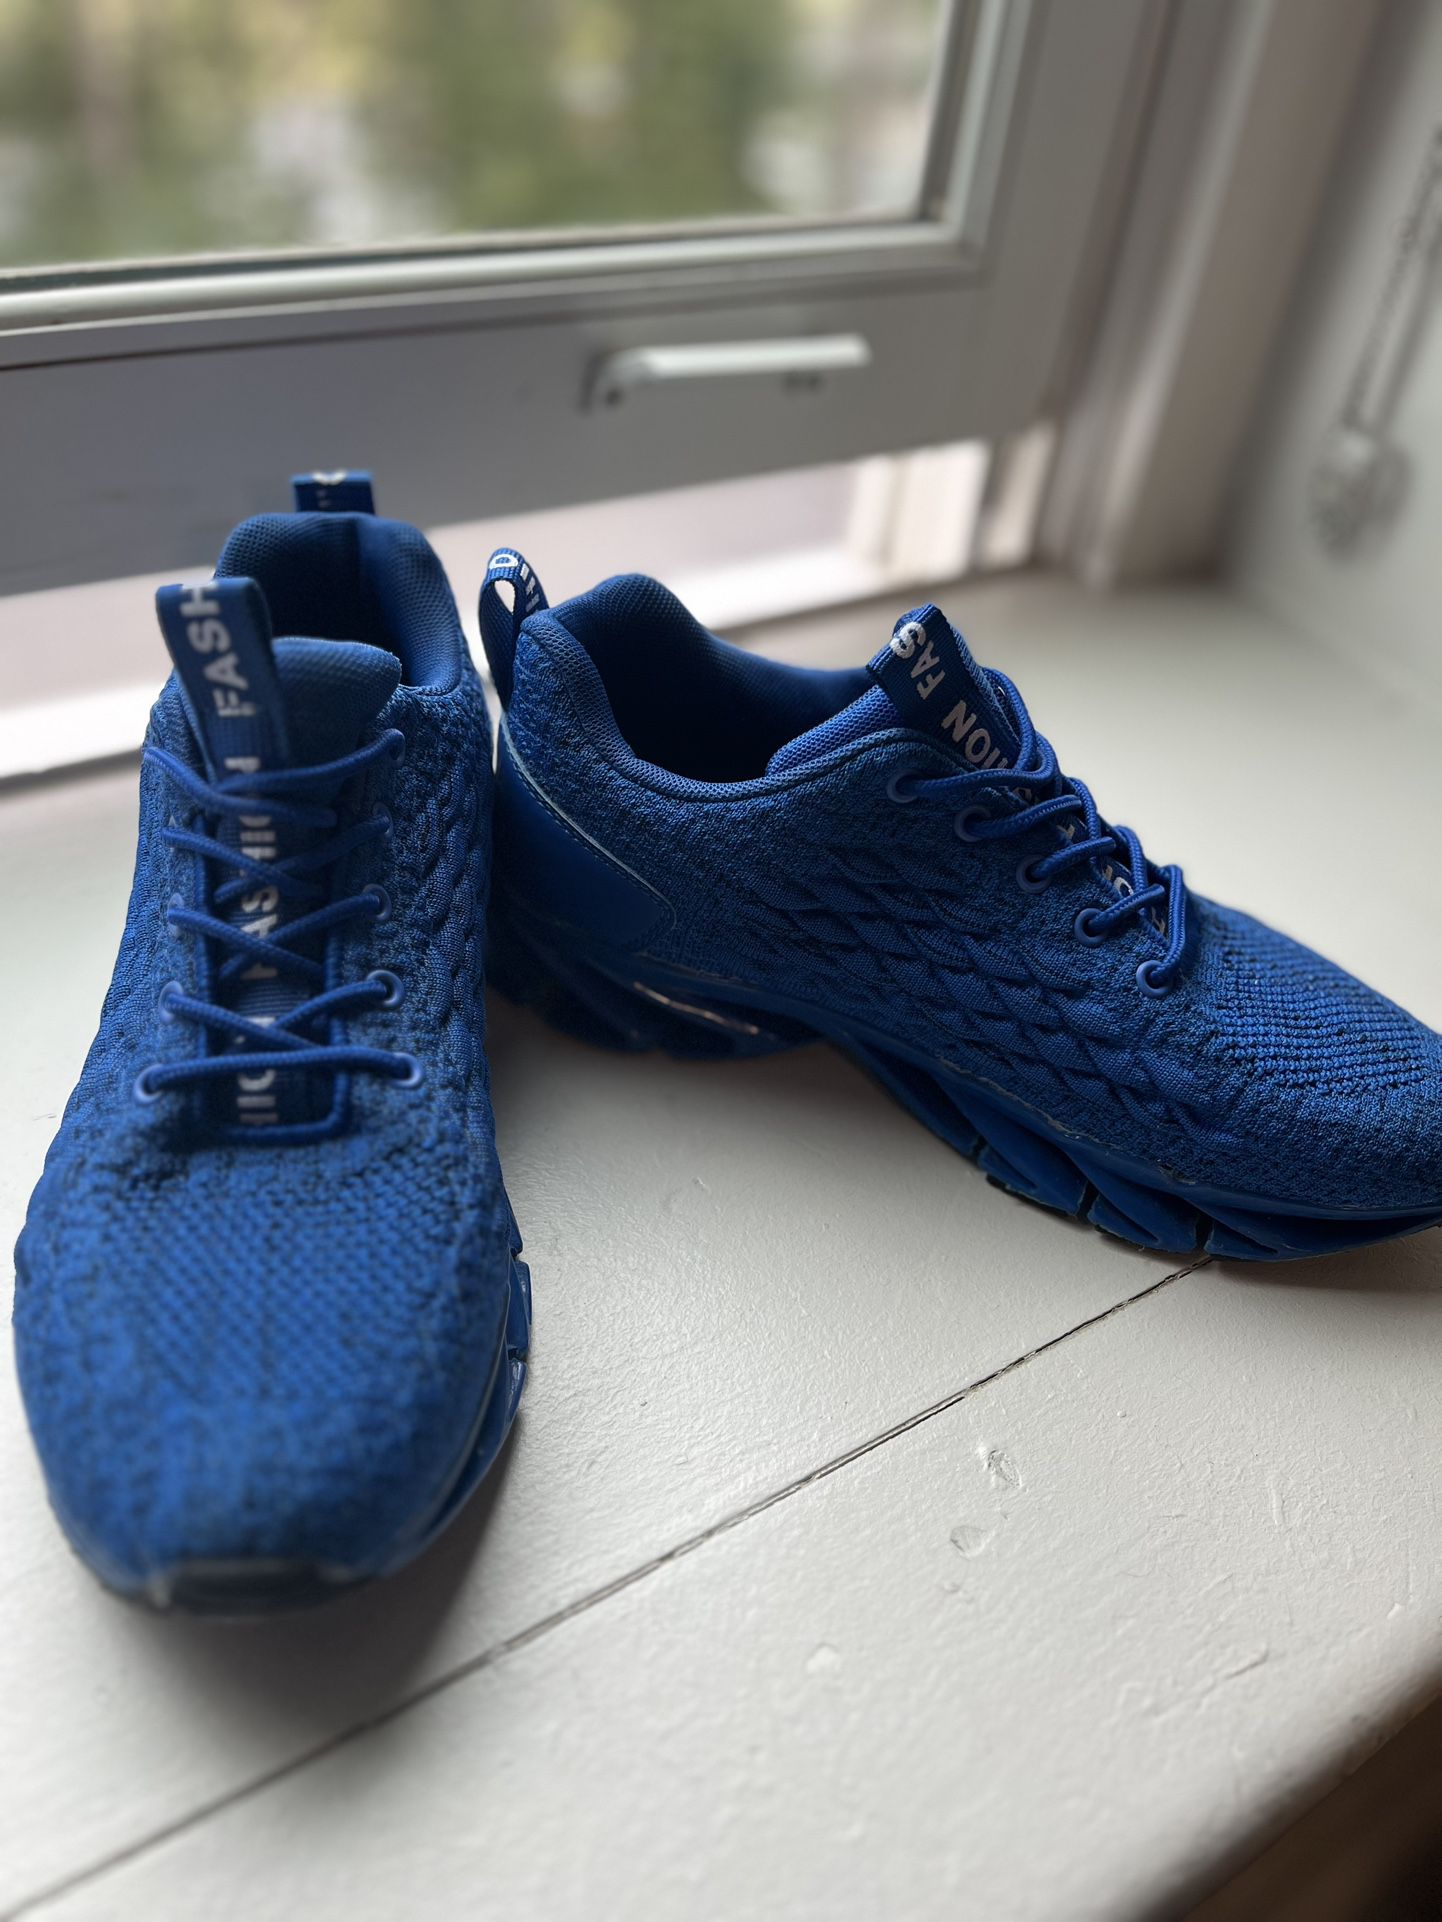 Sports Fashion Running Shoes Blue Size 8 Men’s 